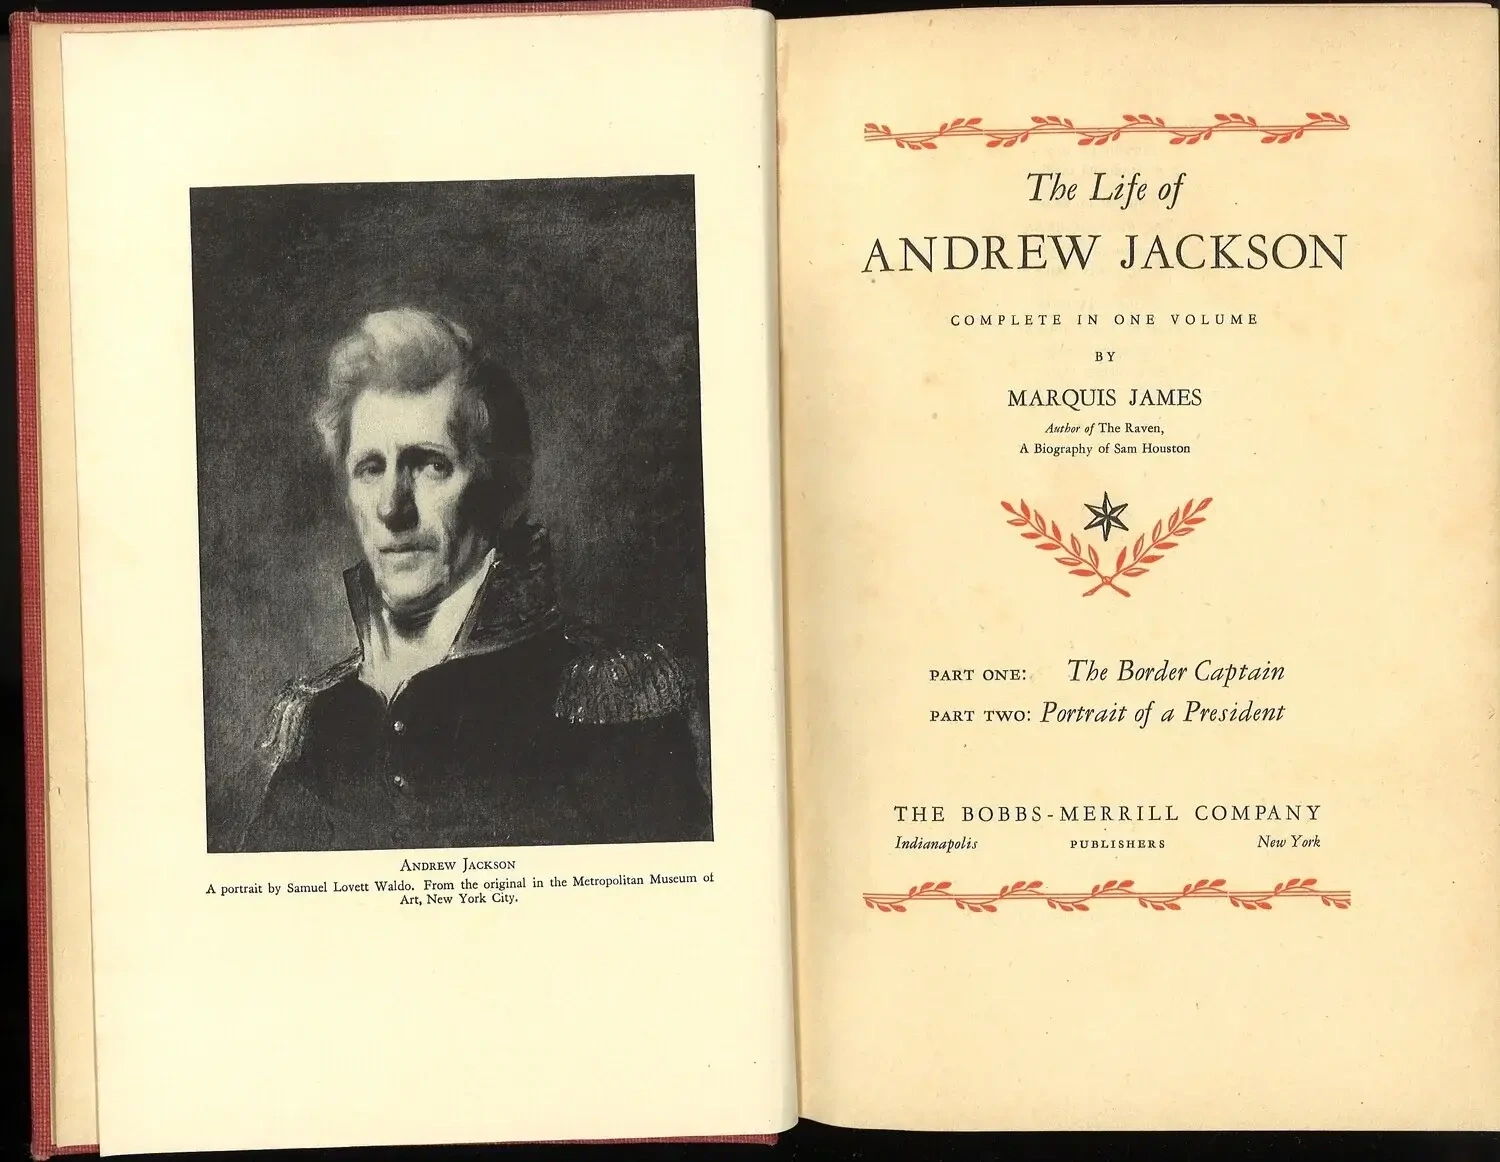 The Life of Andrew Jackson (Complete in 1 Volume), Marquis James